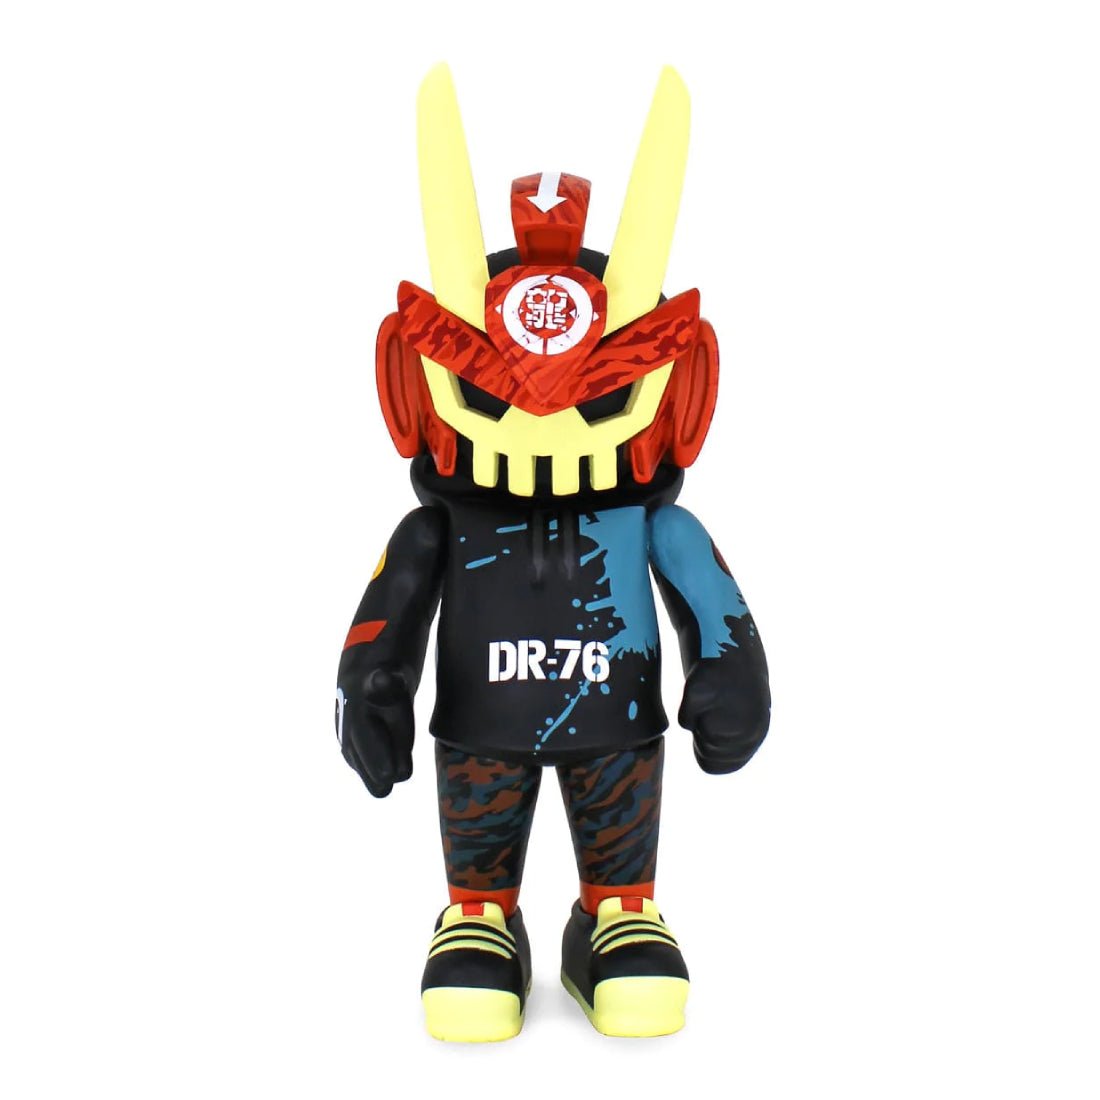 (Pre-Owned) Megateq By Quiccs X Martian Toys - DR 76 - مجسم - Store 974 | ستور ٩٧٤